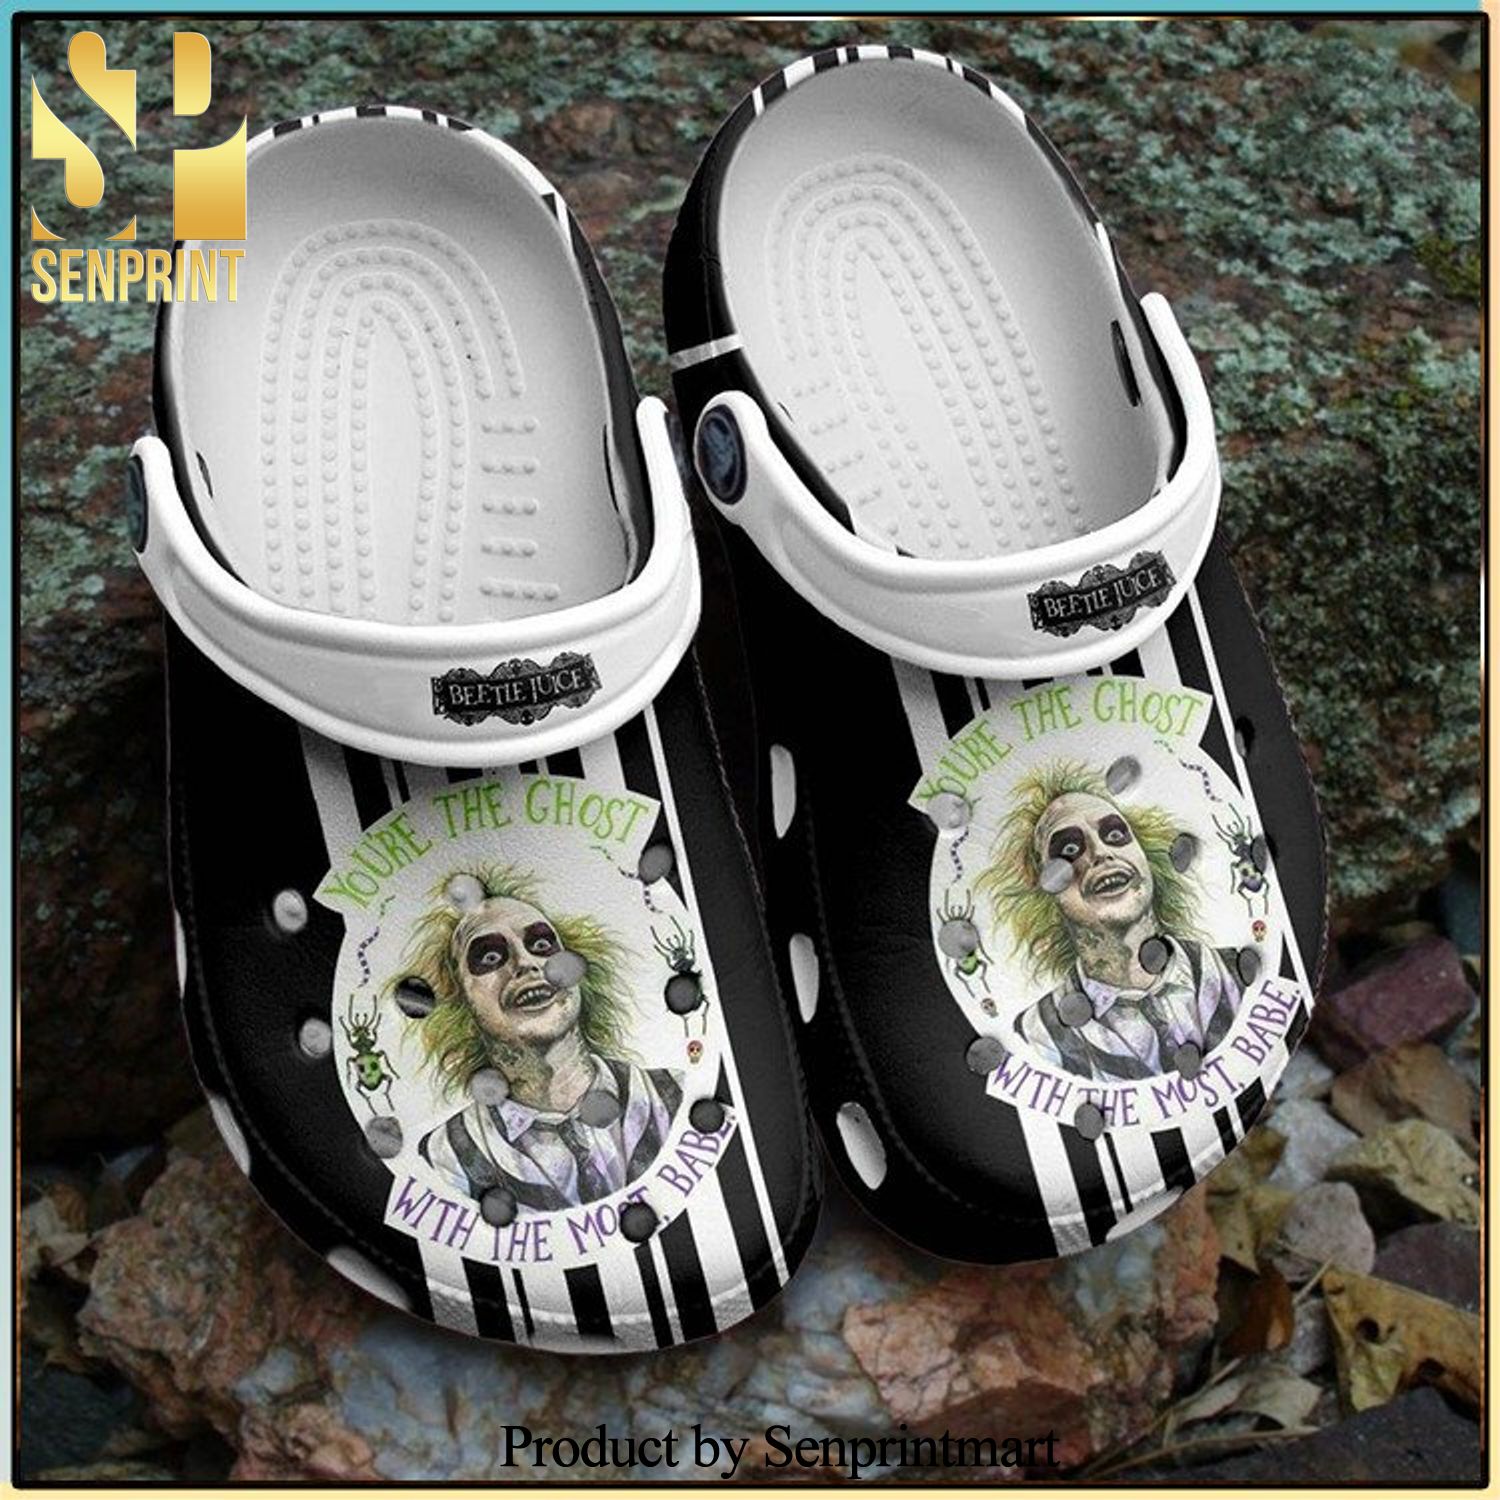 You’Re The Ghost With We Most Babe Halloween Gift For Fan Classic Water Rubber Crocs Sandals